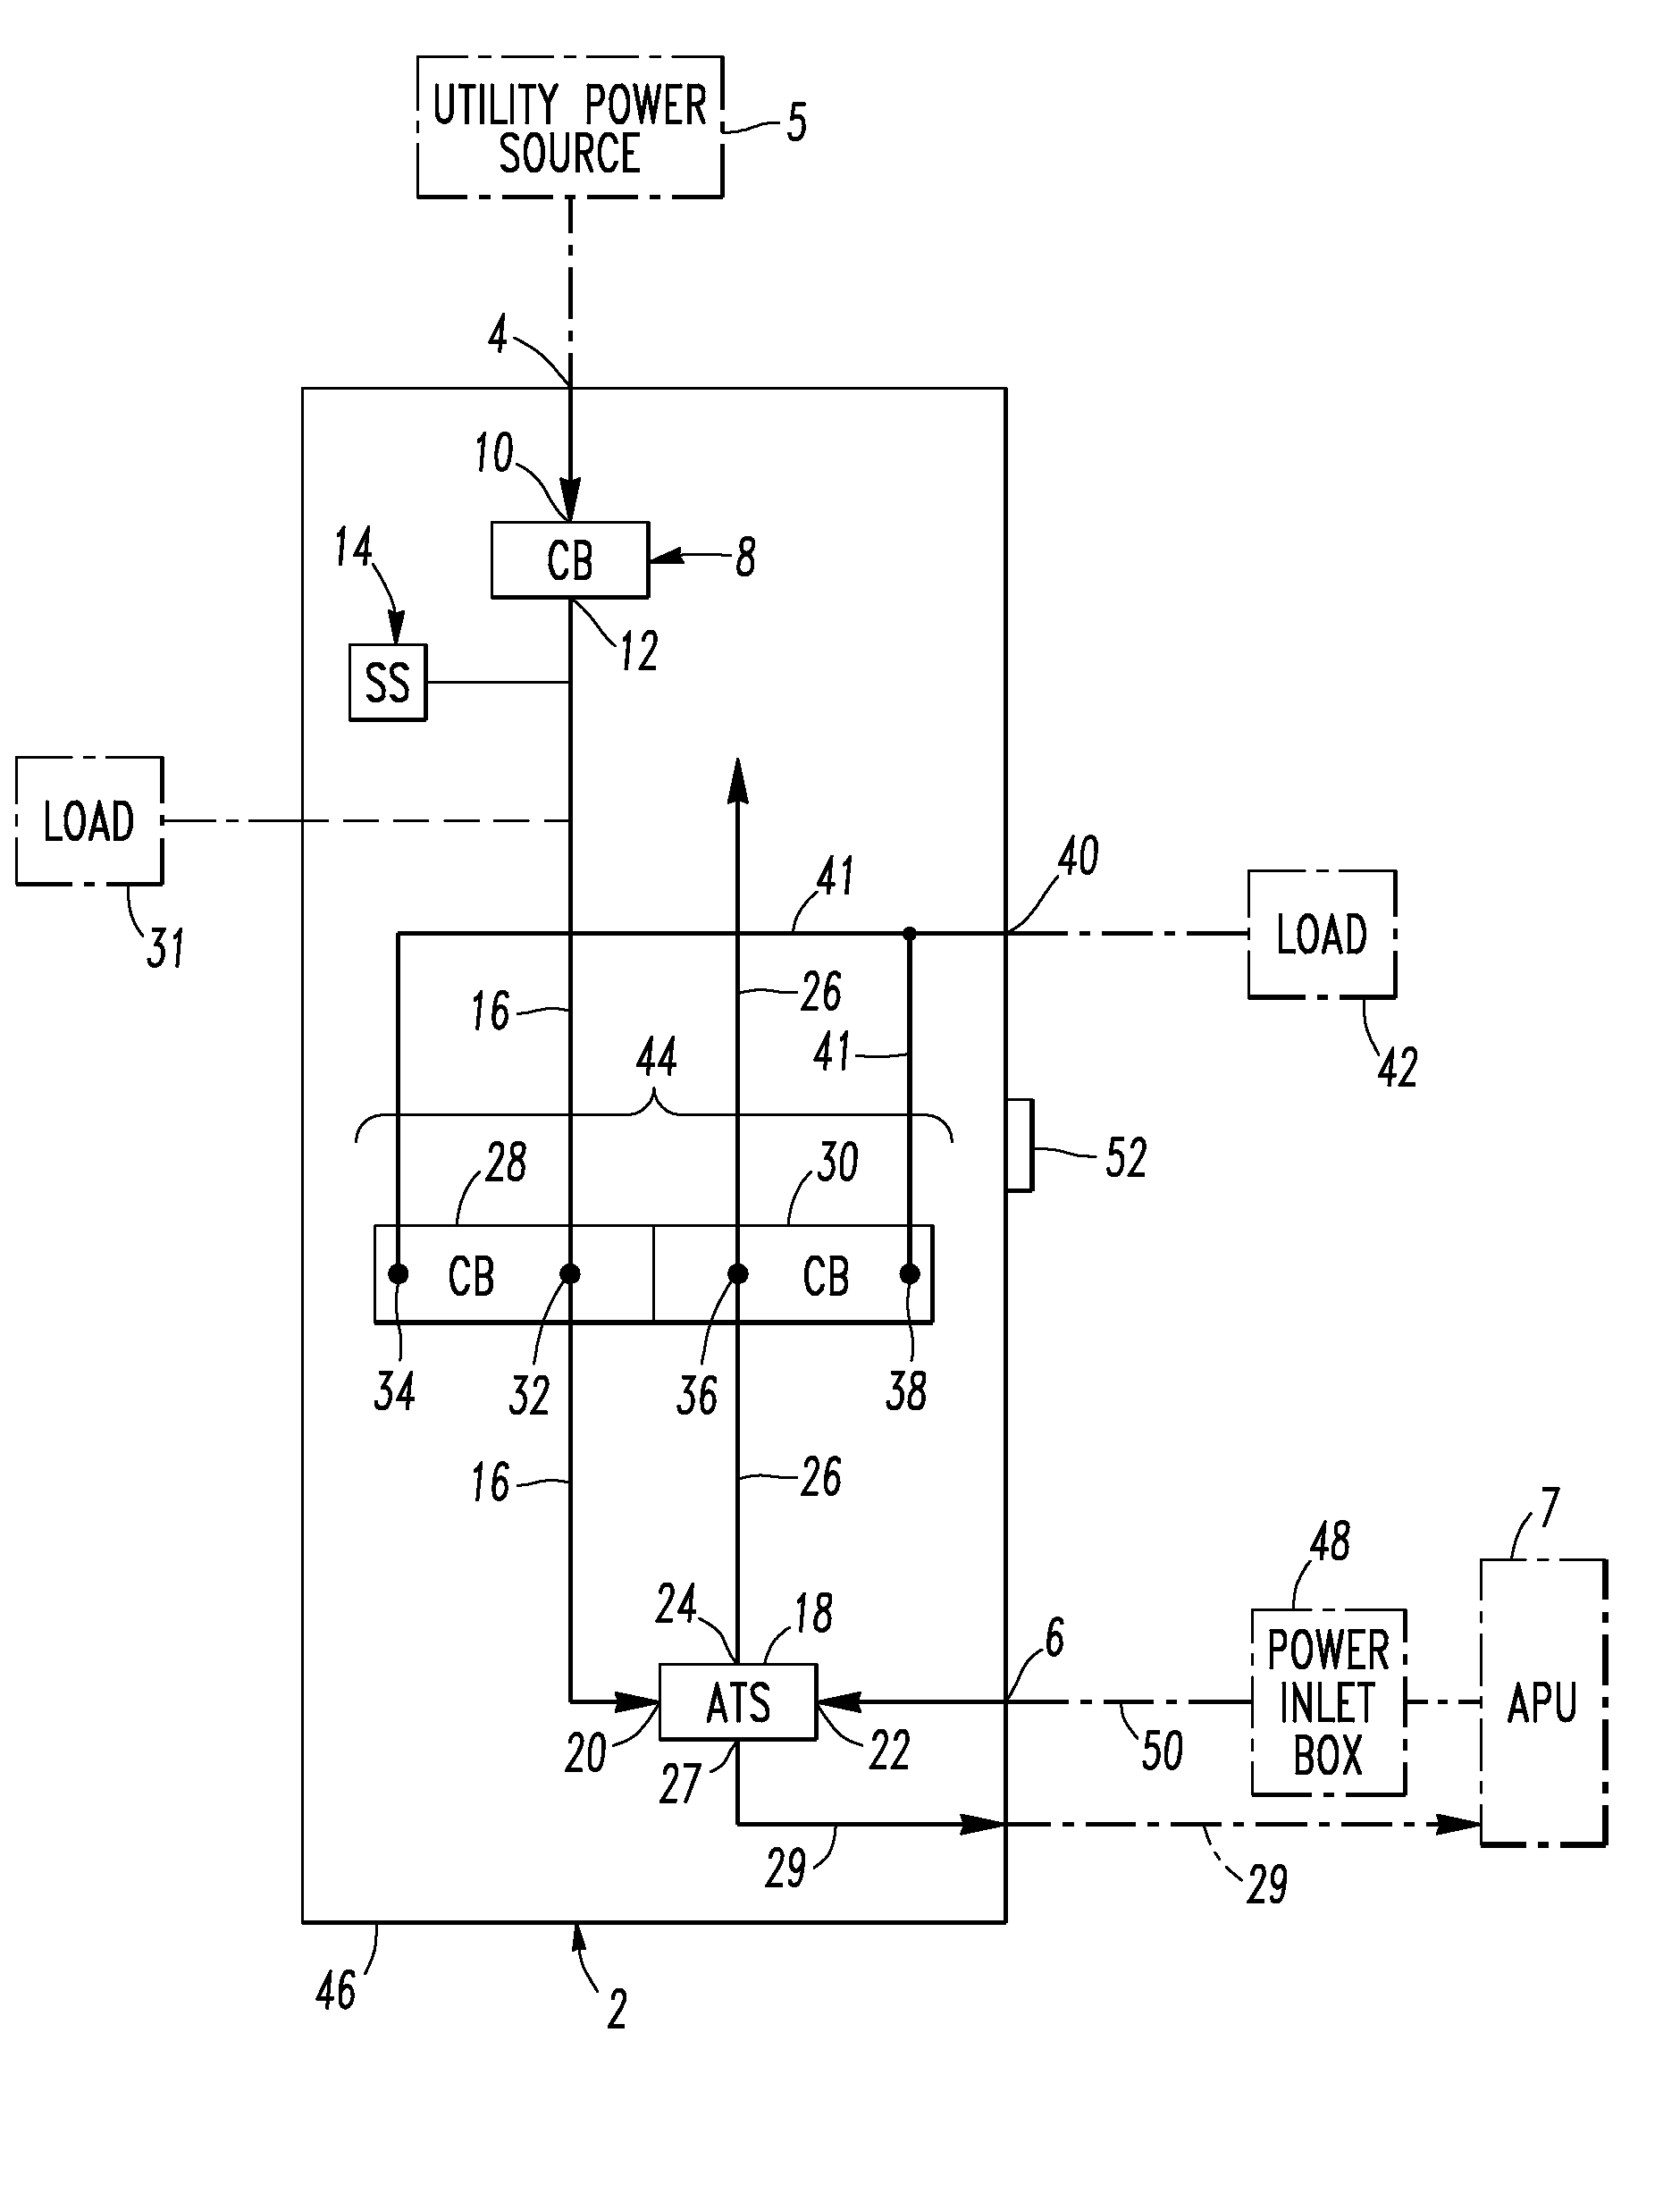 Electrical distribution panel for a number of critical and non-critical loads